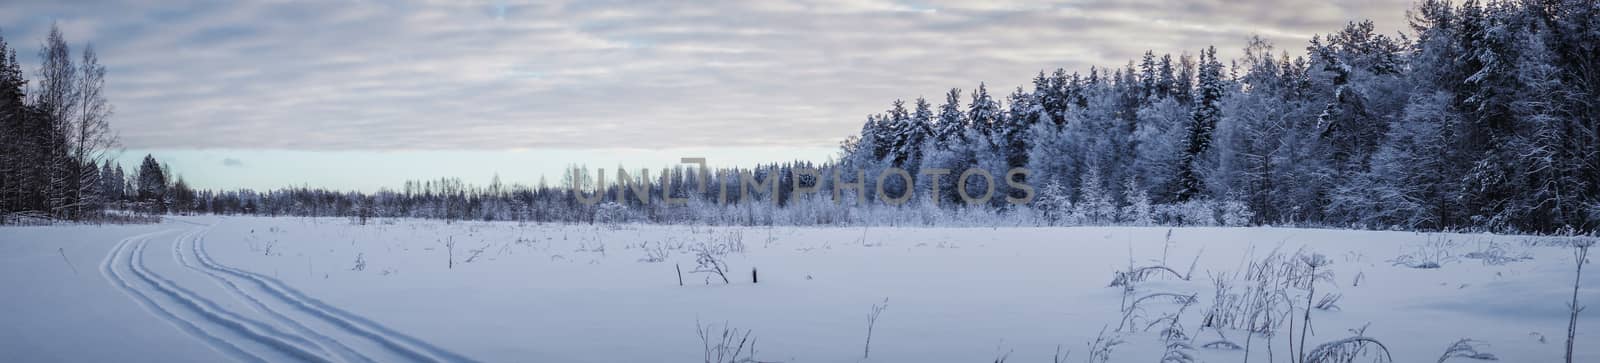 Winter landscape panorama by helgy